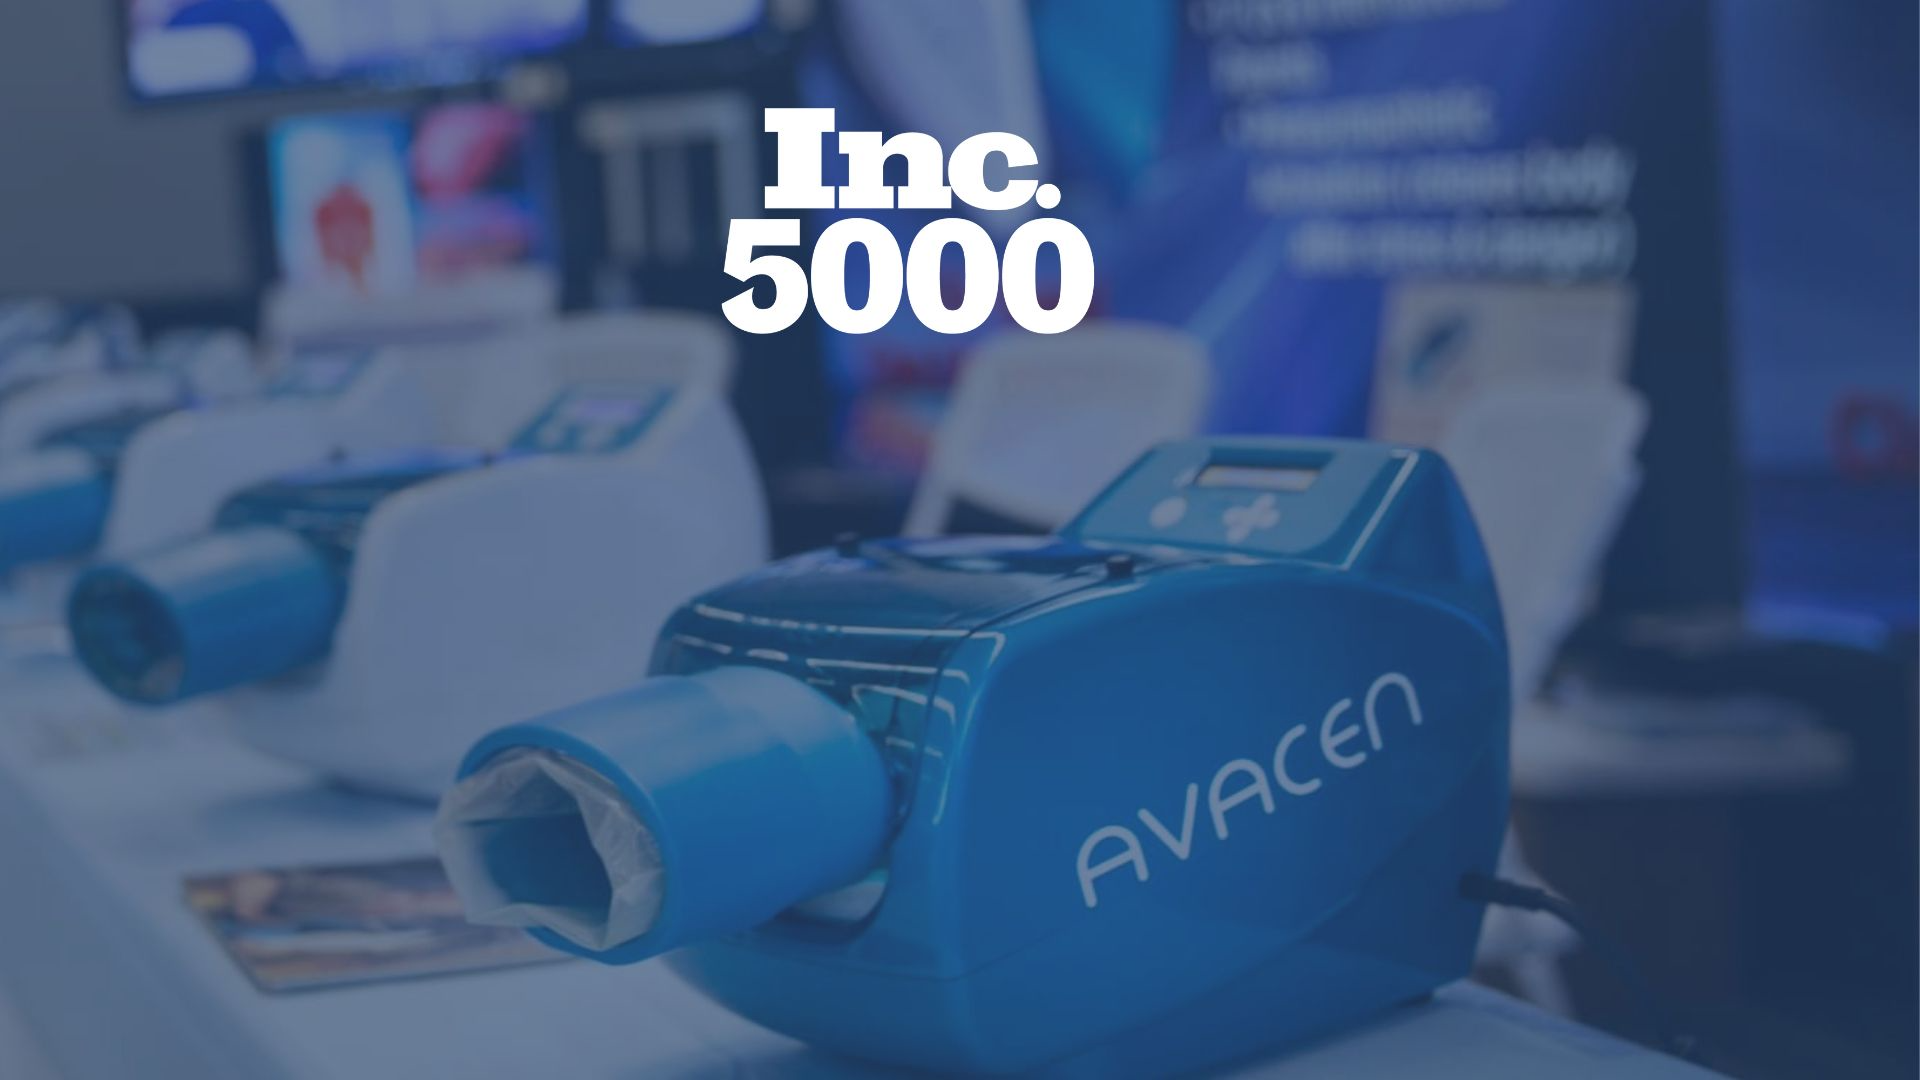 AVACEN Medical Makes the Inc. 5000 for the 4th Straight Year